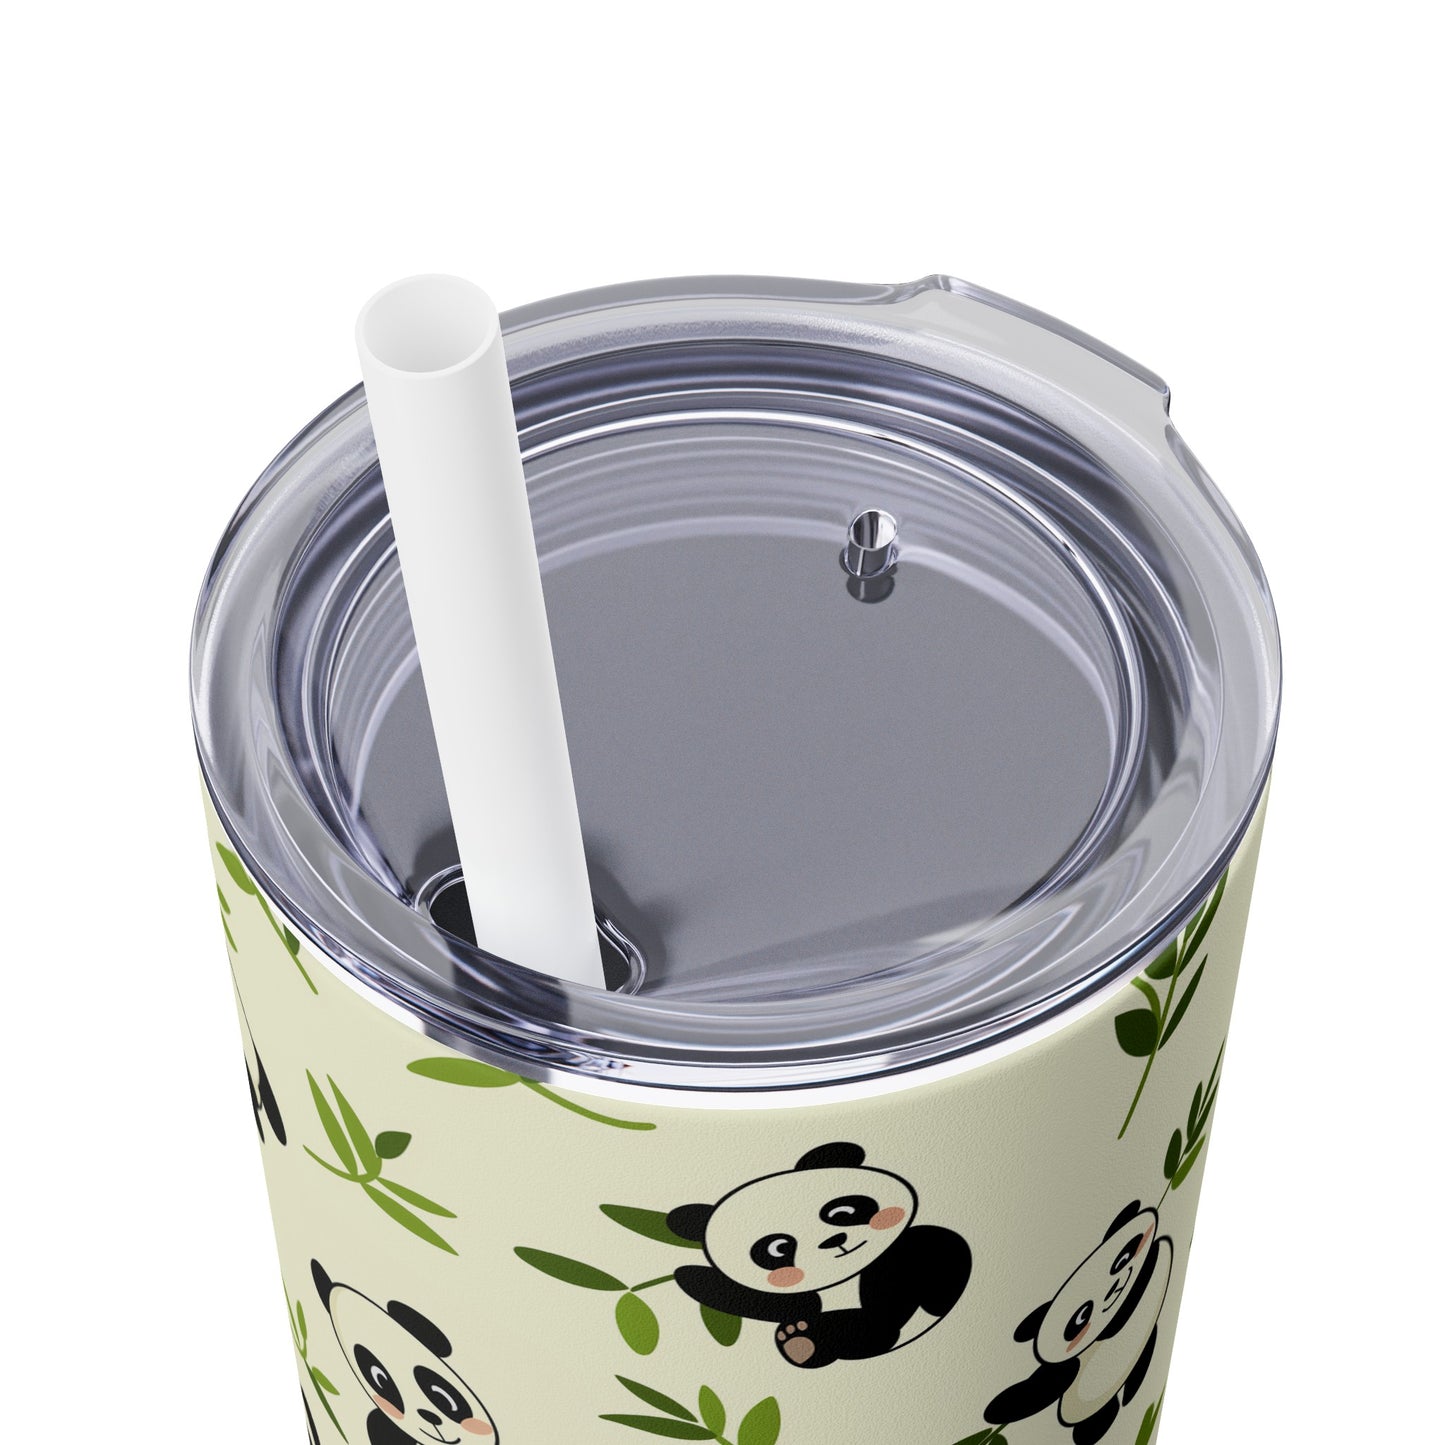 Insulated 20 oz Tumbler with Lid & Straw, Panda Bear Cubs - Double-walled Stainless Steel, Keeps Drinks Hot or Cold